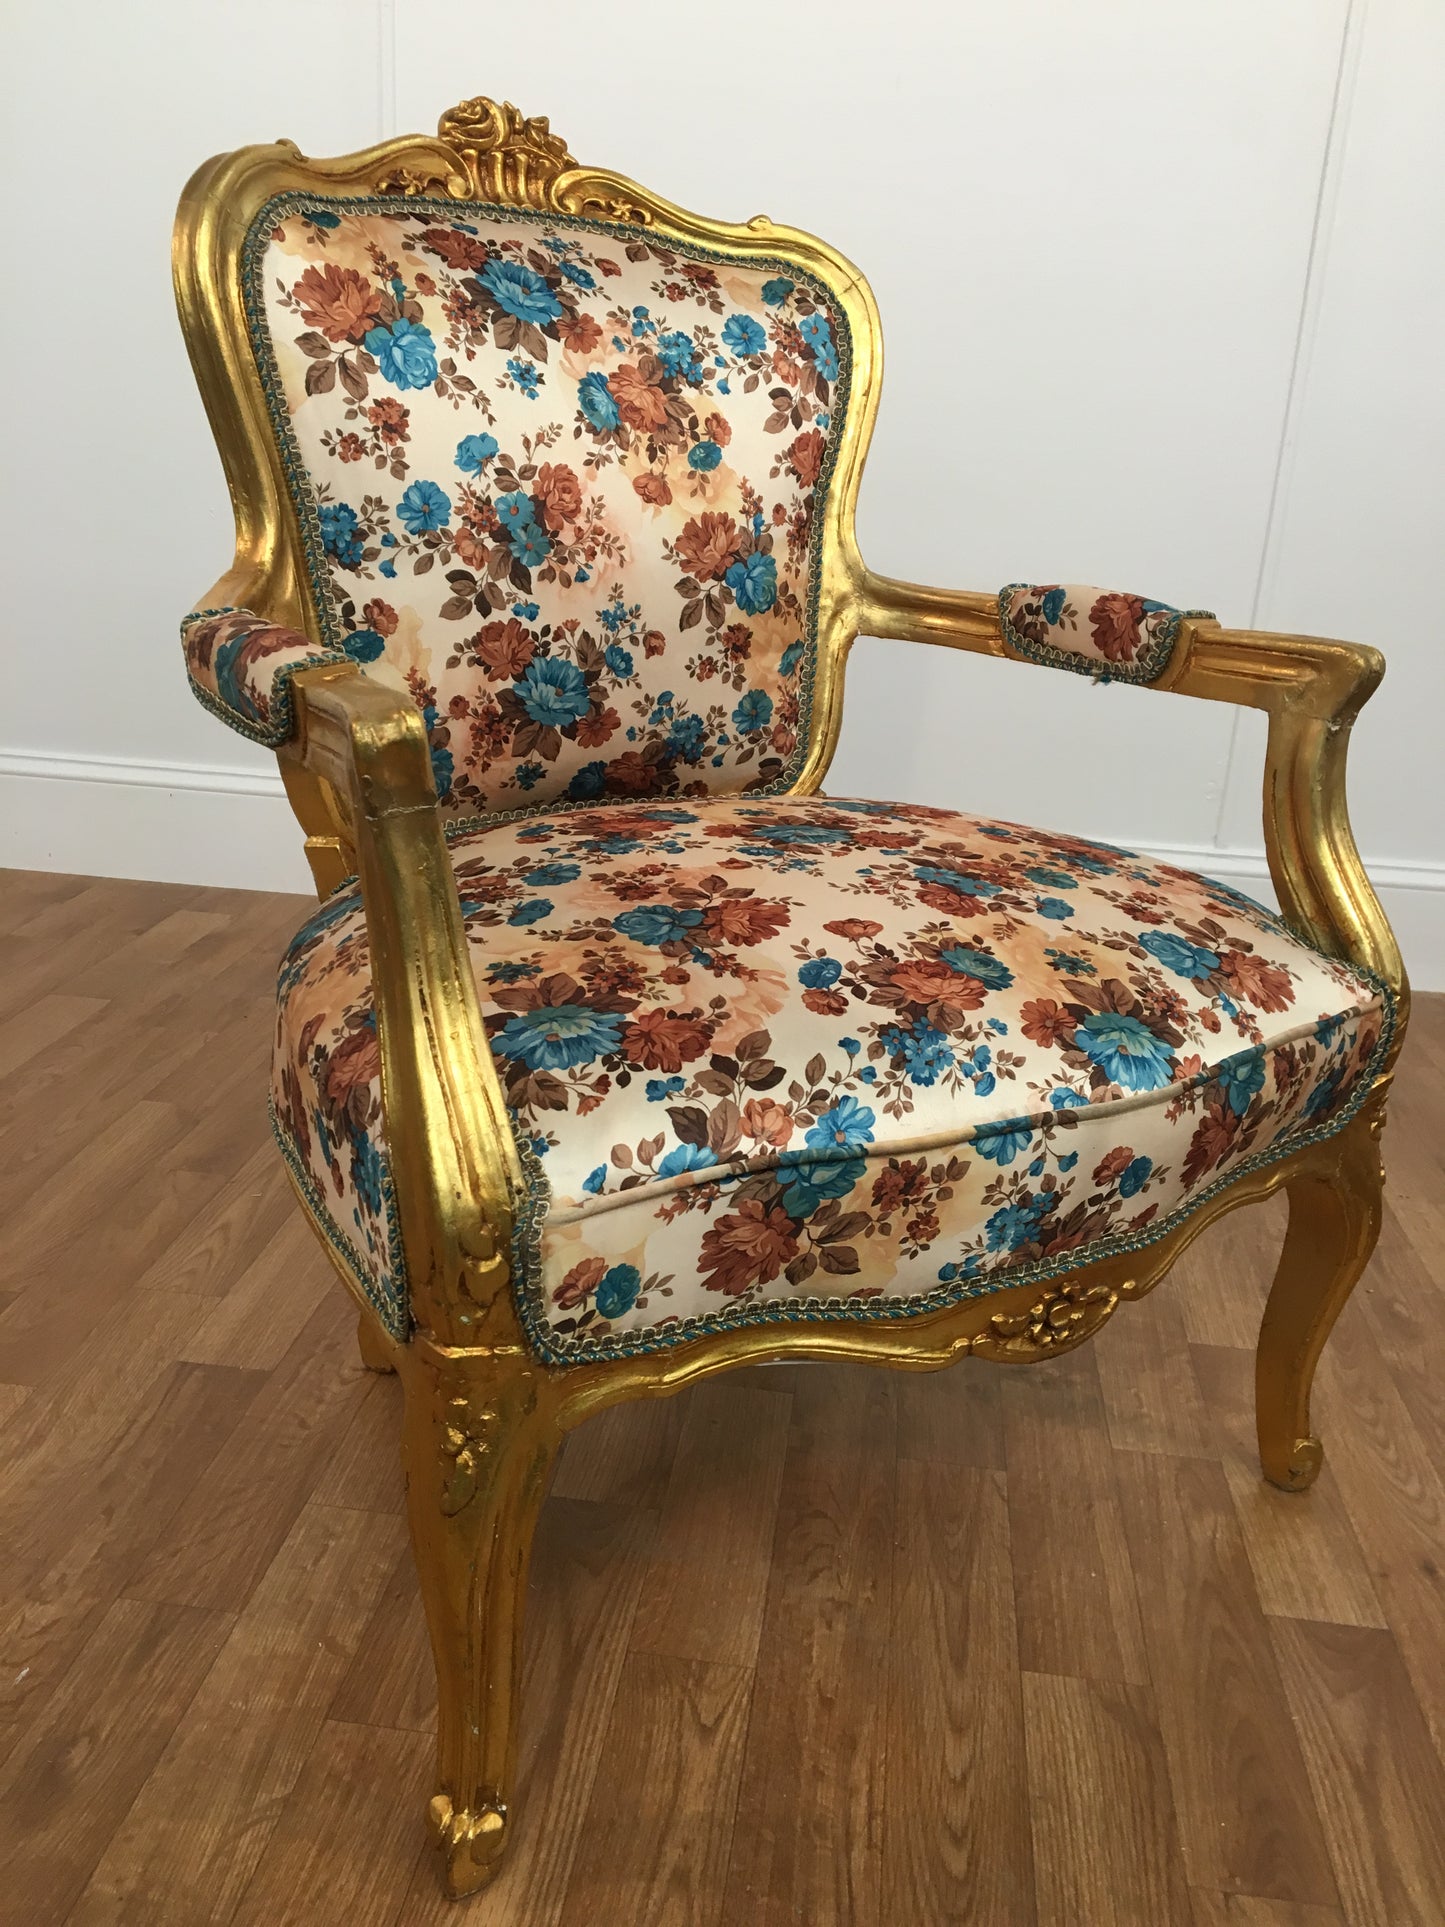 ORNATE FRENCH PROVINCIAL ARM CHAIR